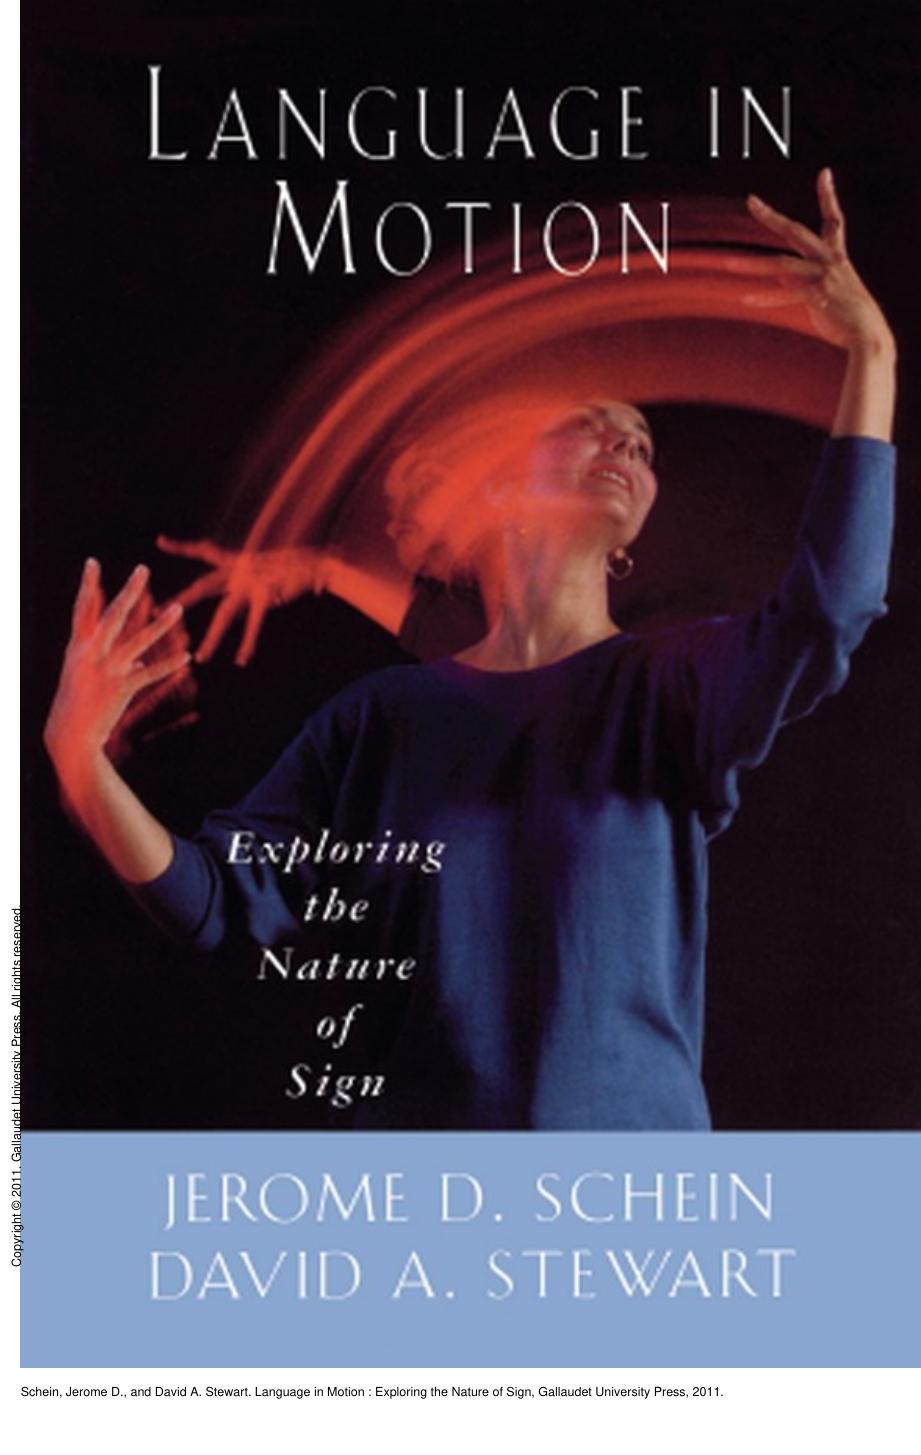 Language in Motion : Exploring the Nature of Sign by Jerome D. Schein; David A. Stewart